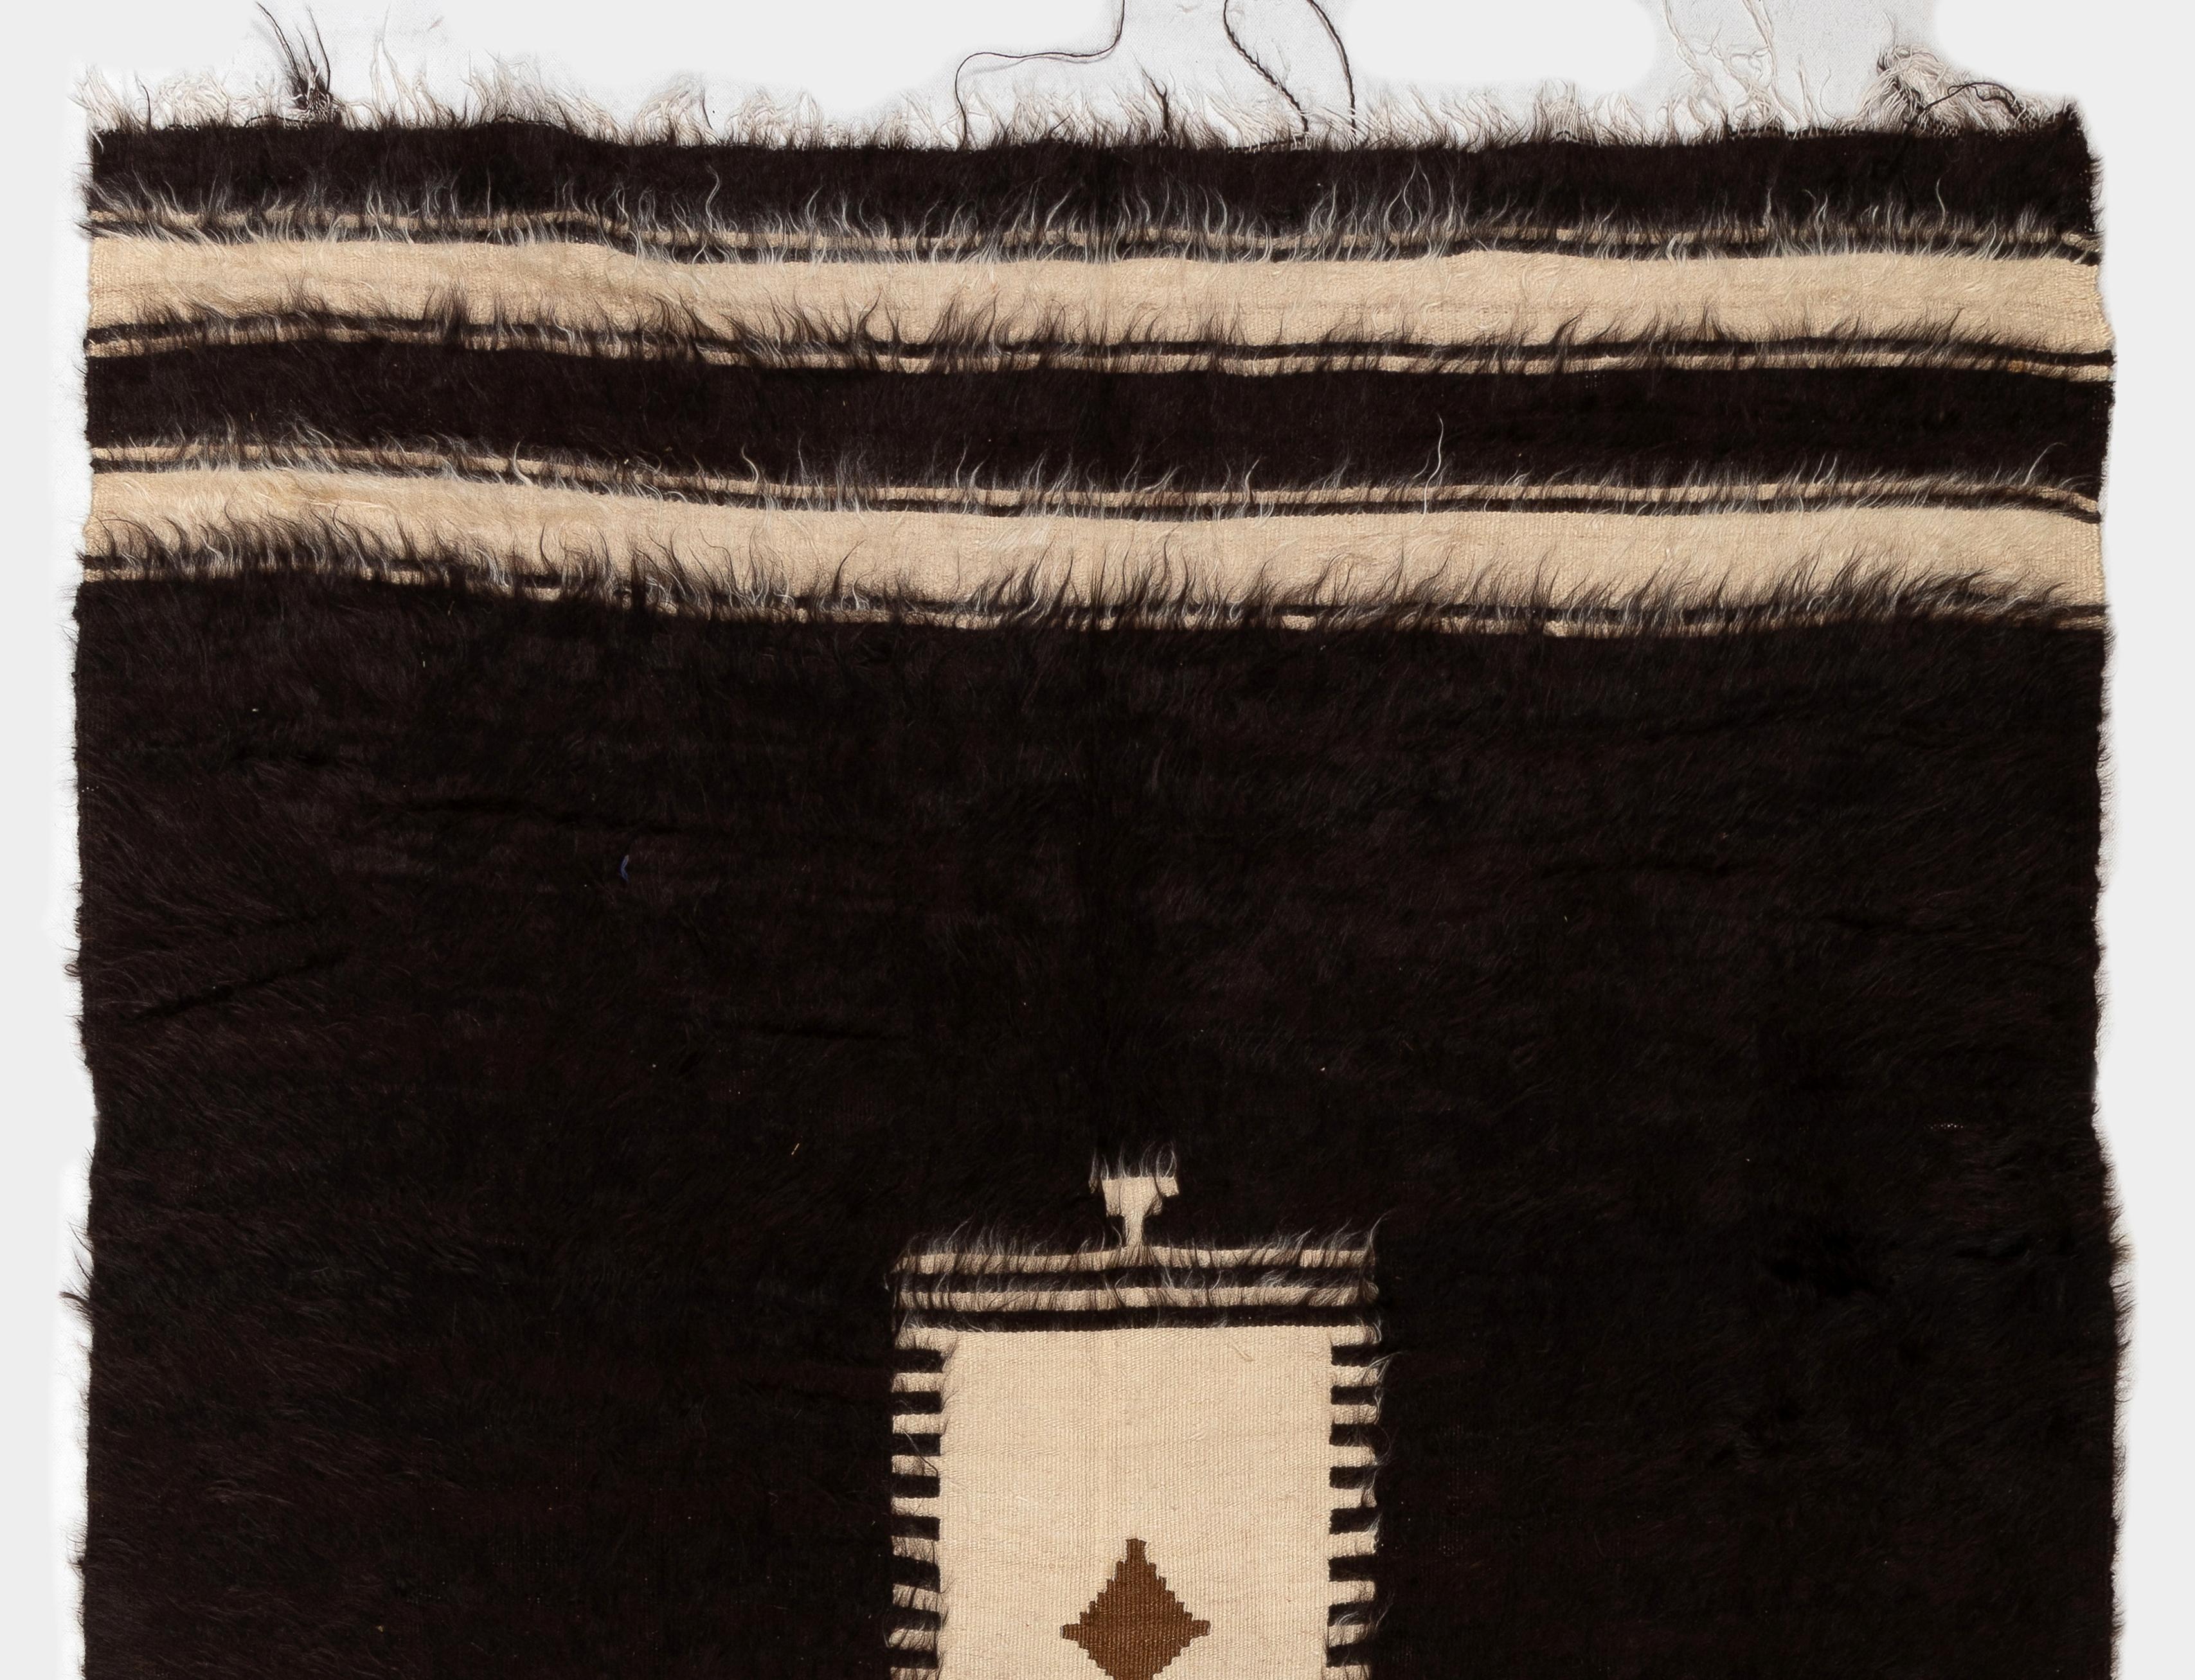 Tribal 4.6x6.3 Ft Flat-Weave Mohair Rug, Ideal as Bed and Floor Cover, Sofa Throw